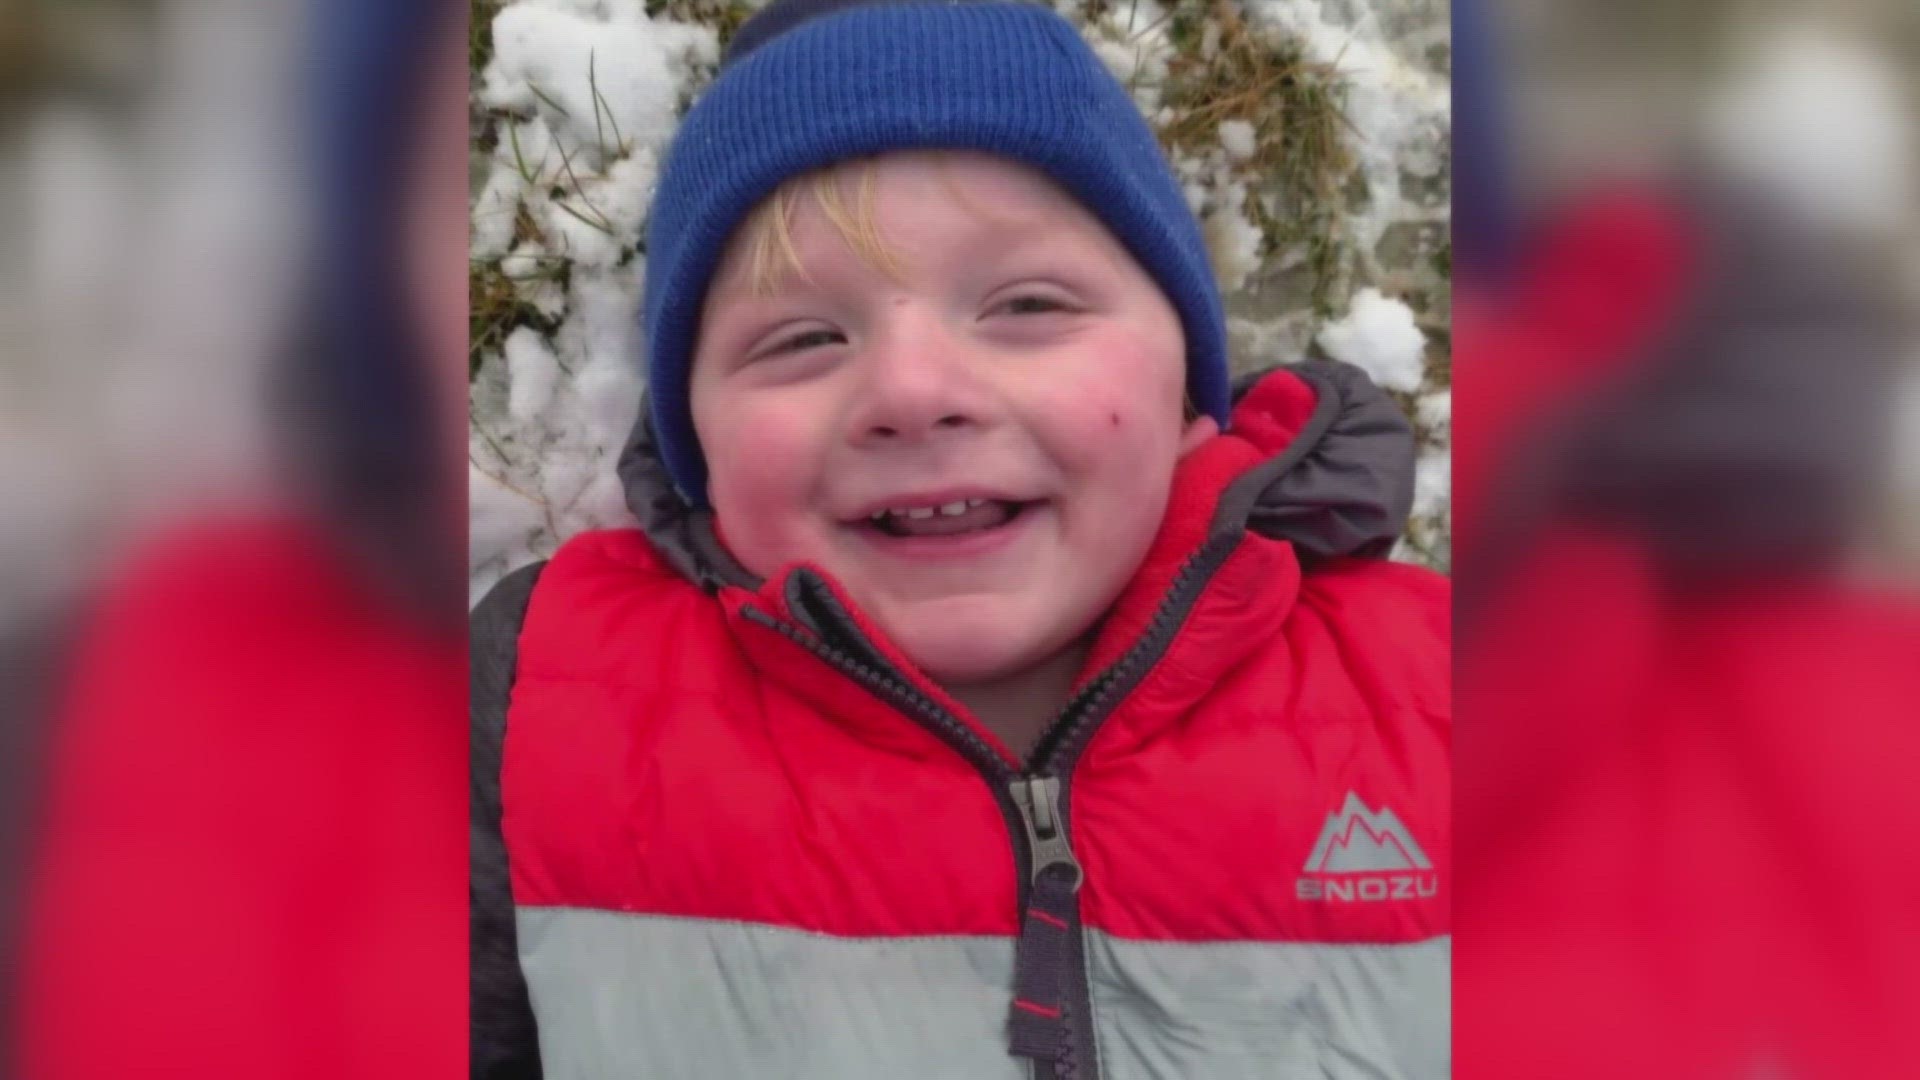 A family is grappling with the loss of its youngest member, a special kid to the Searsport community.